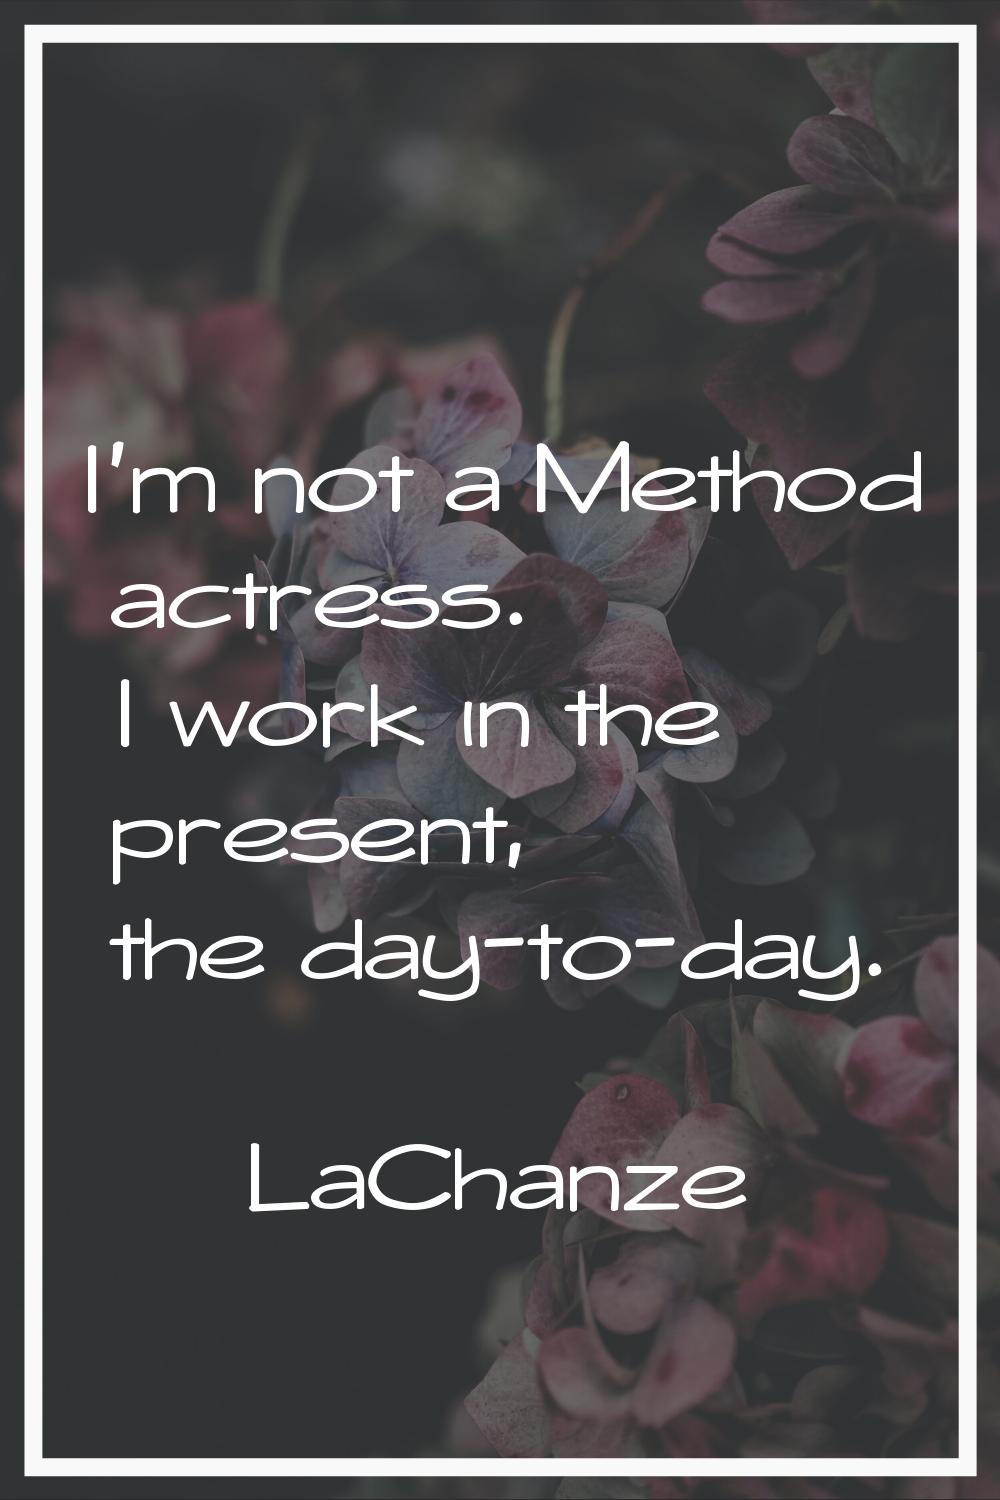 I'm not a Method actress. I work in the present, the day-to-day.